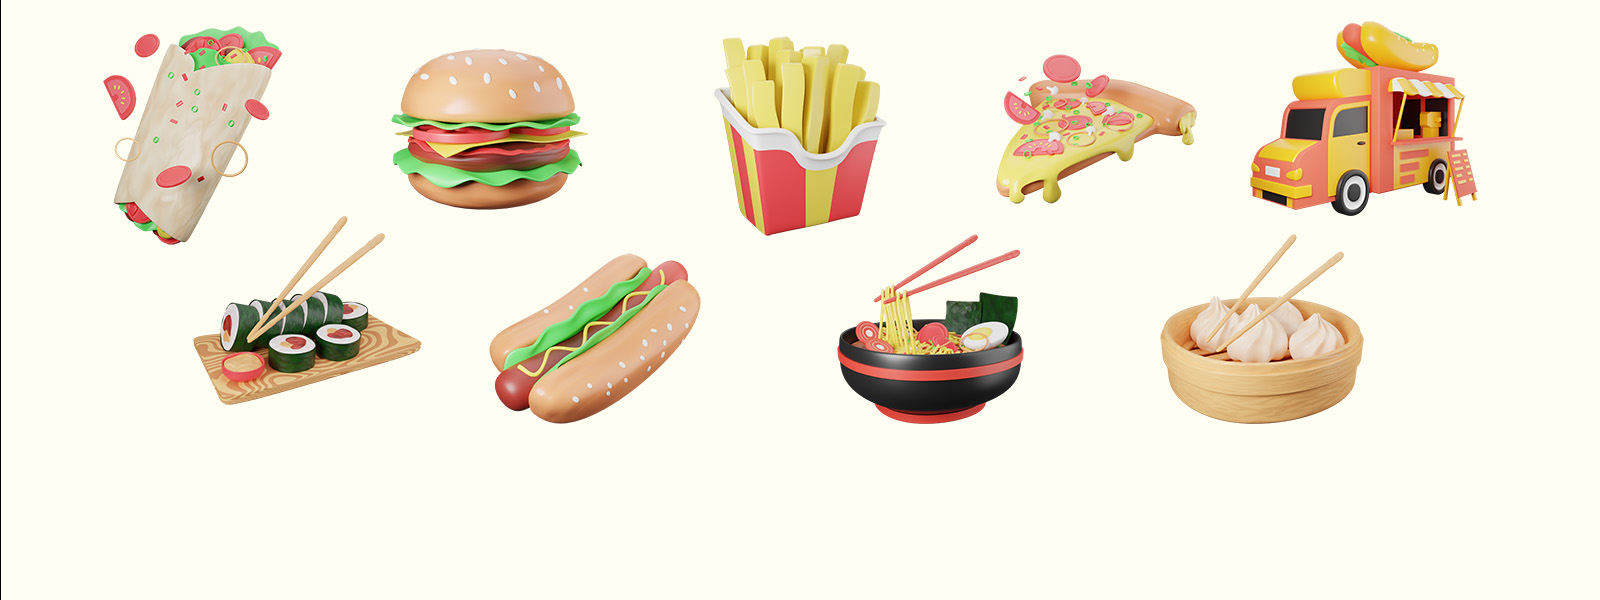 icons of various foods